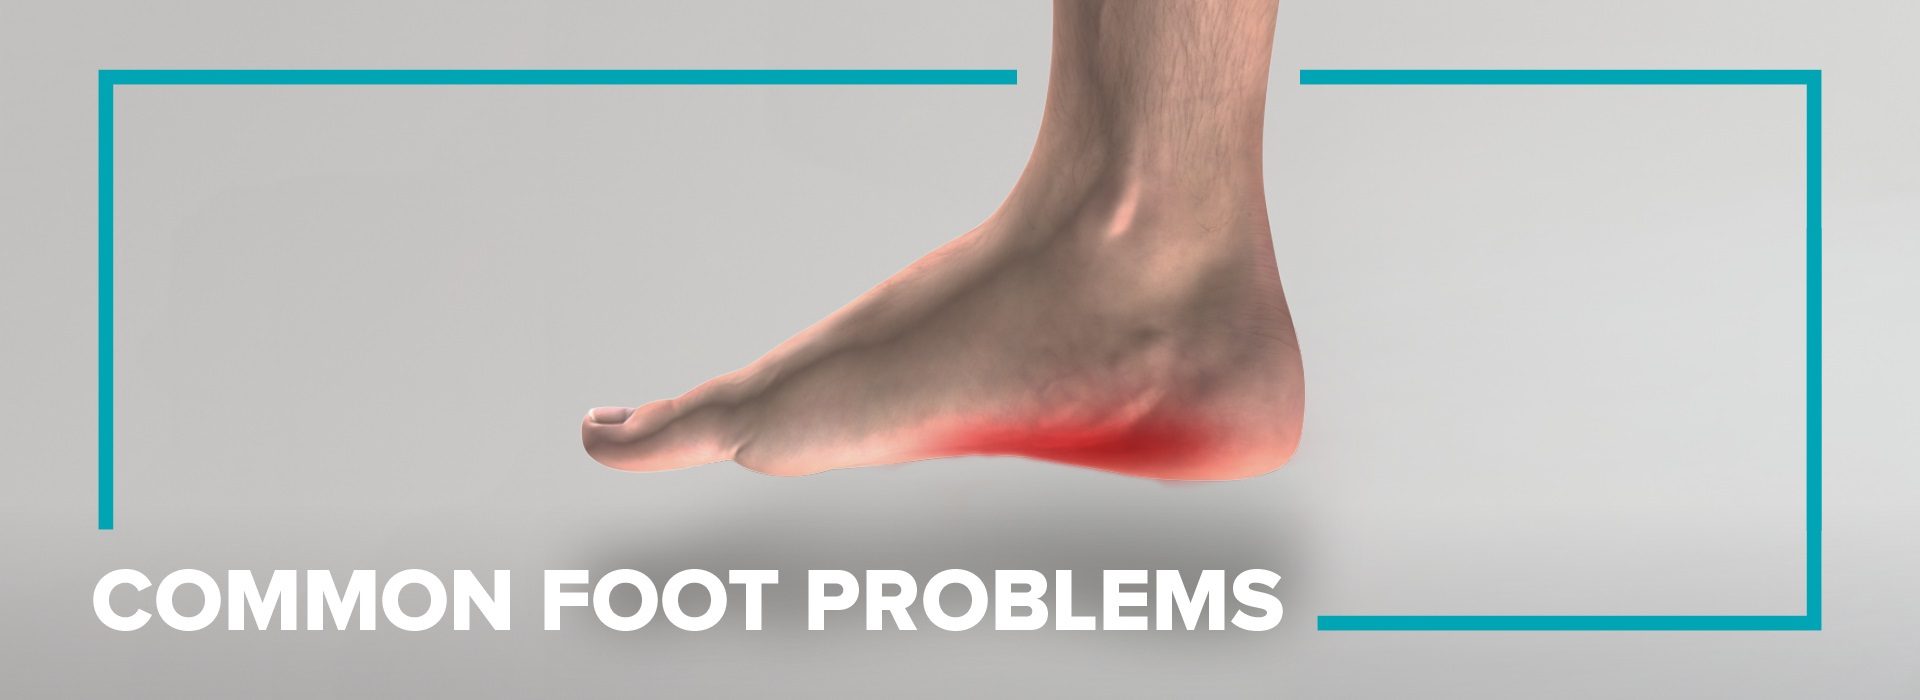 Helping Ease Common Foot Problems 